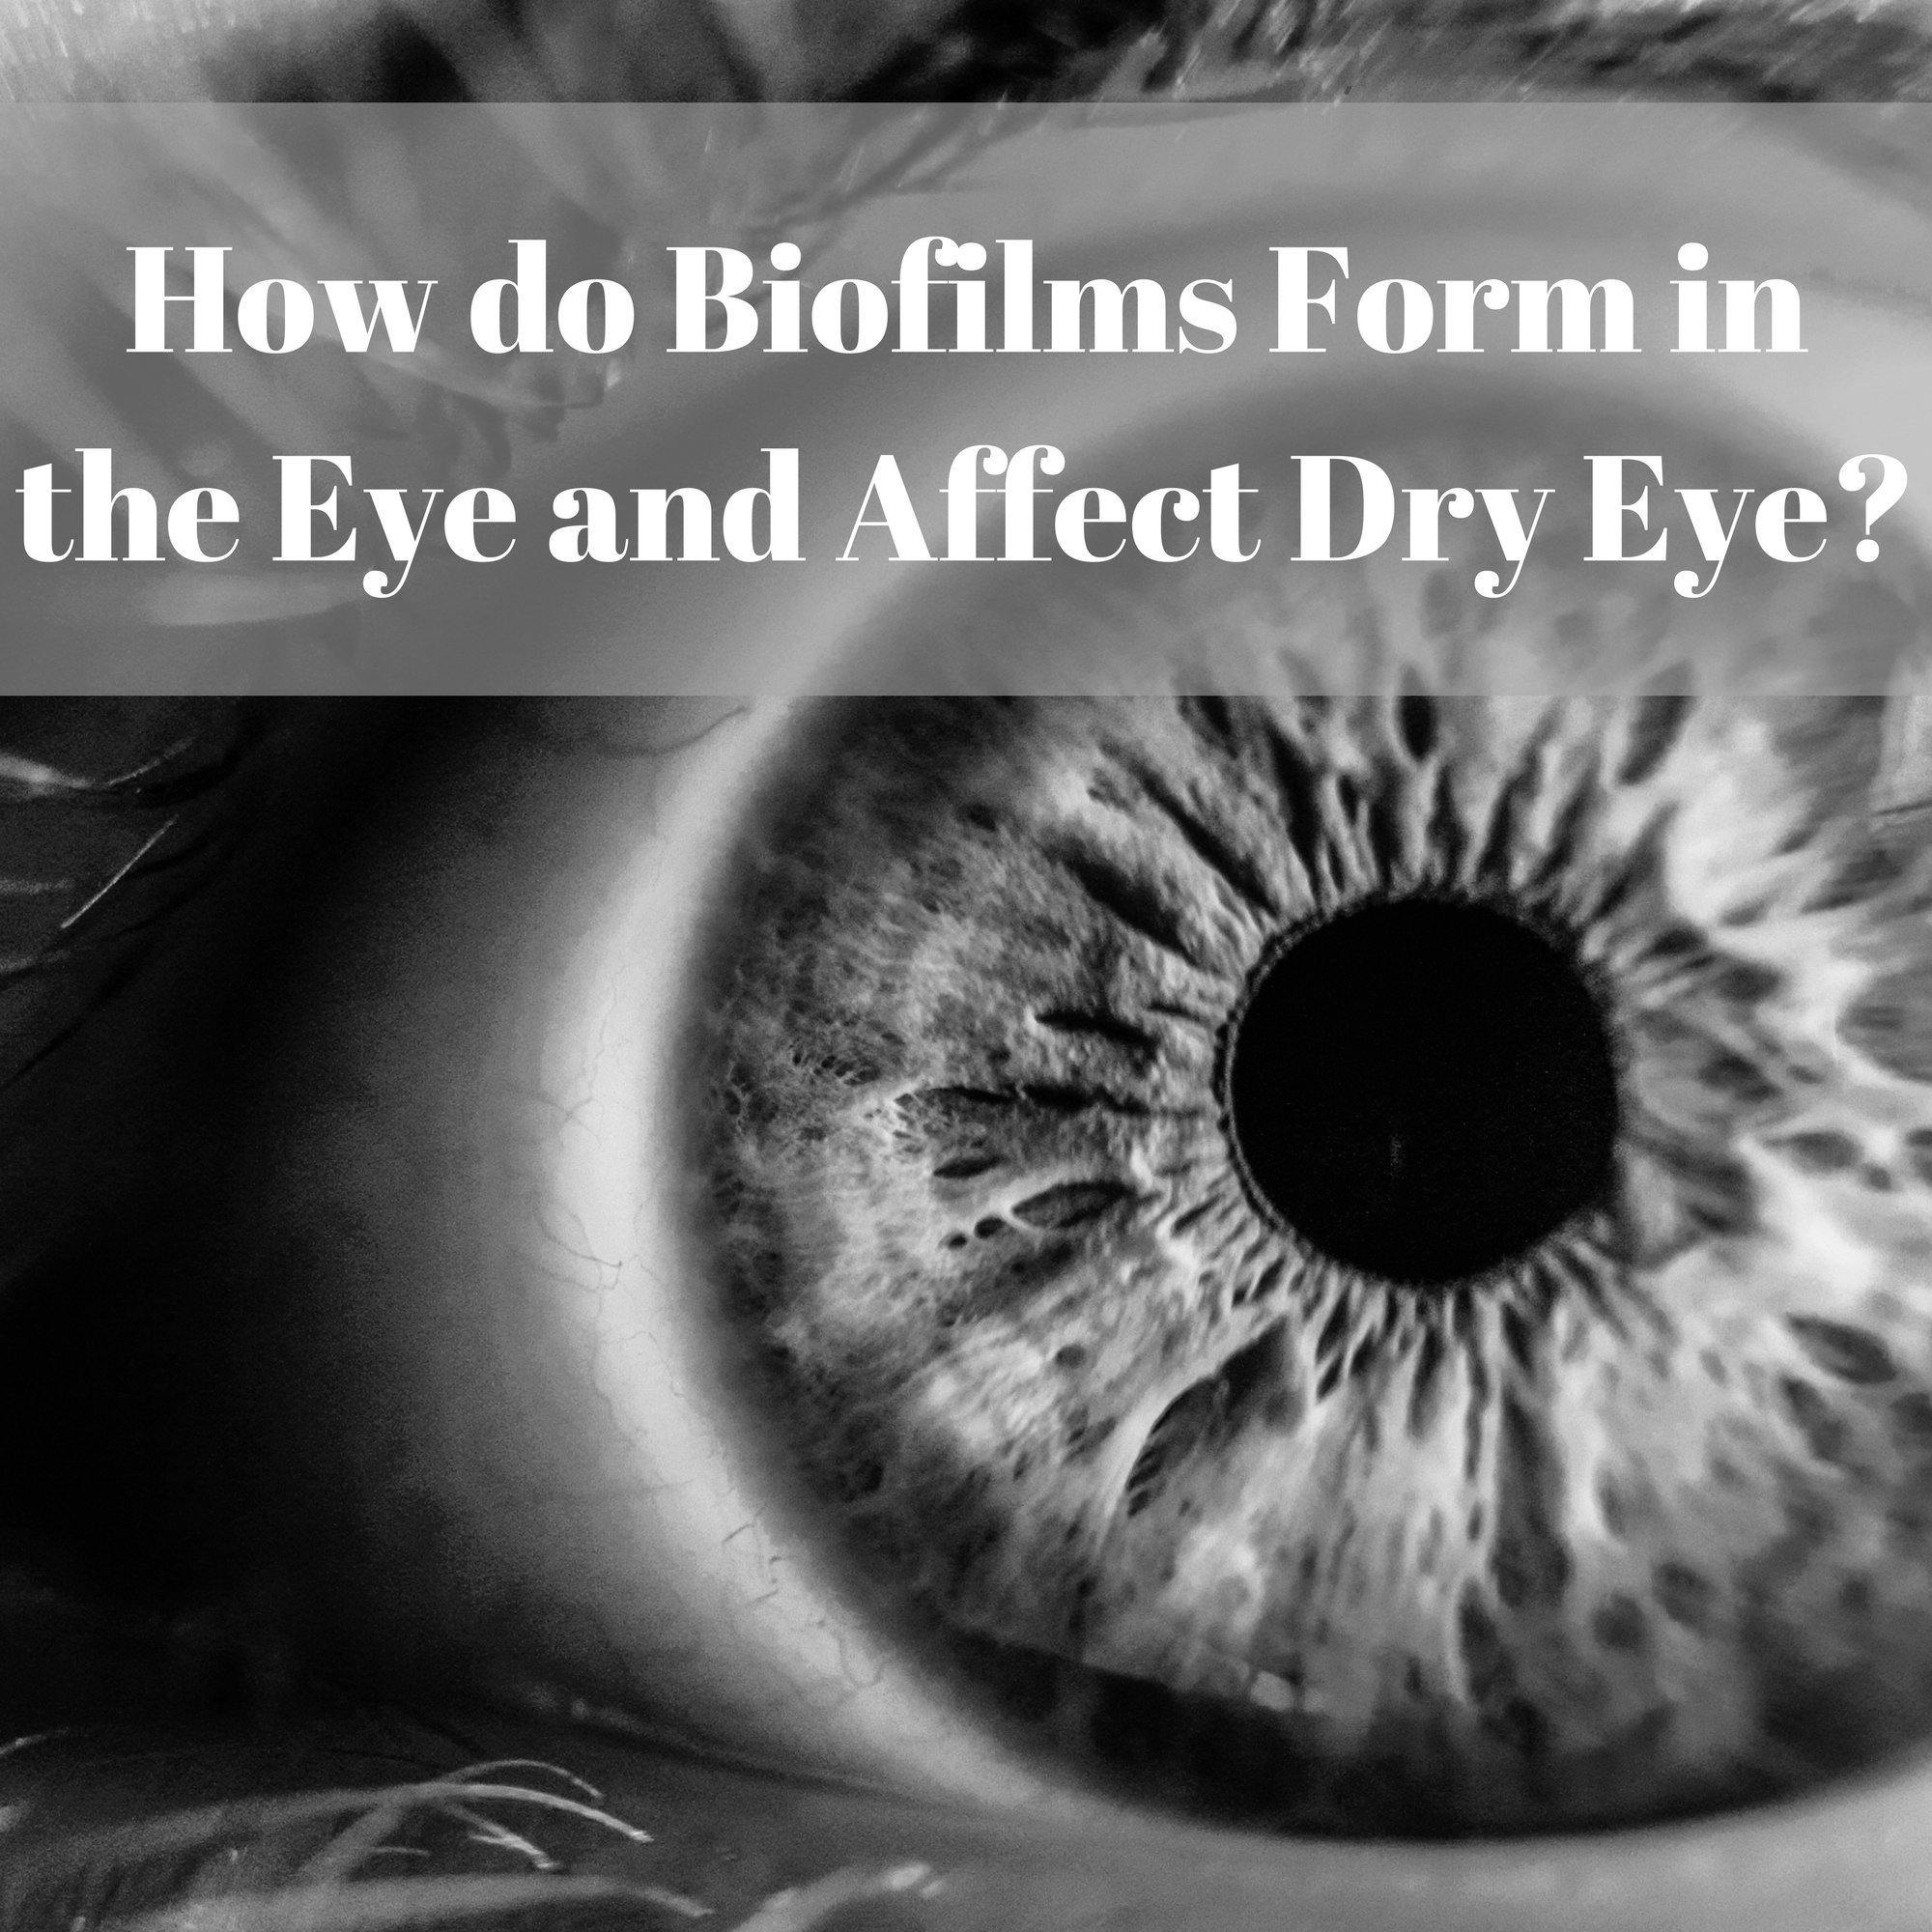 How do Biofilms Form in the Eye and Affect Dry Eye?